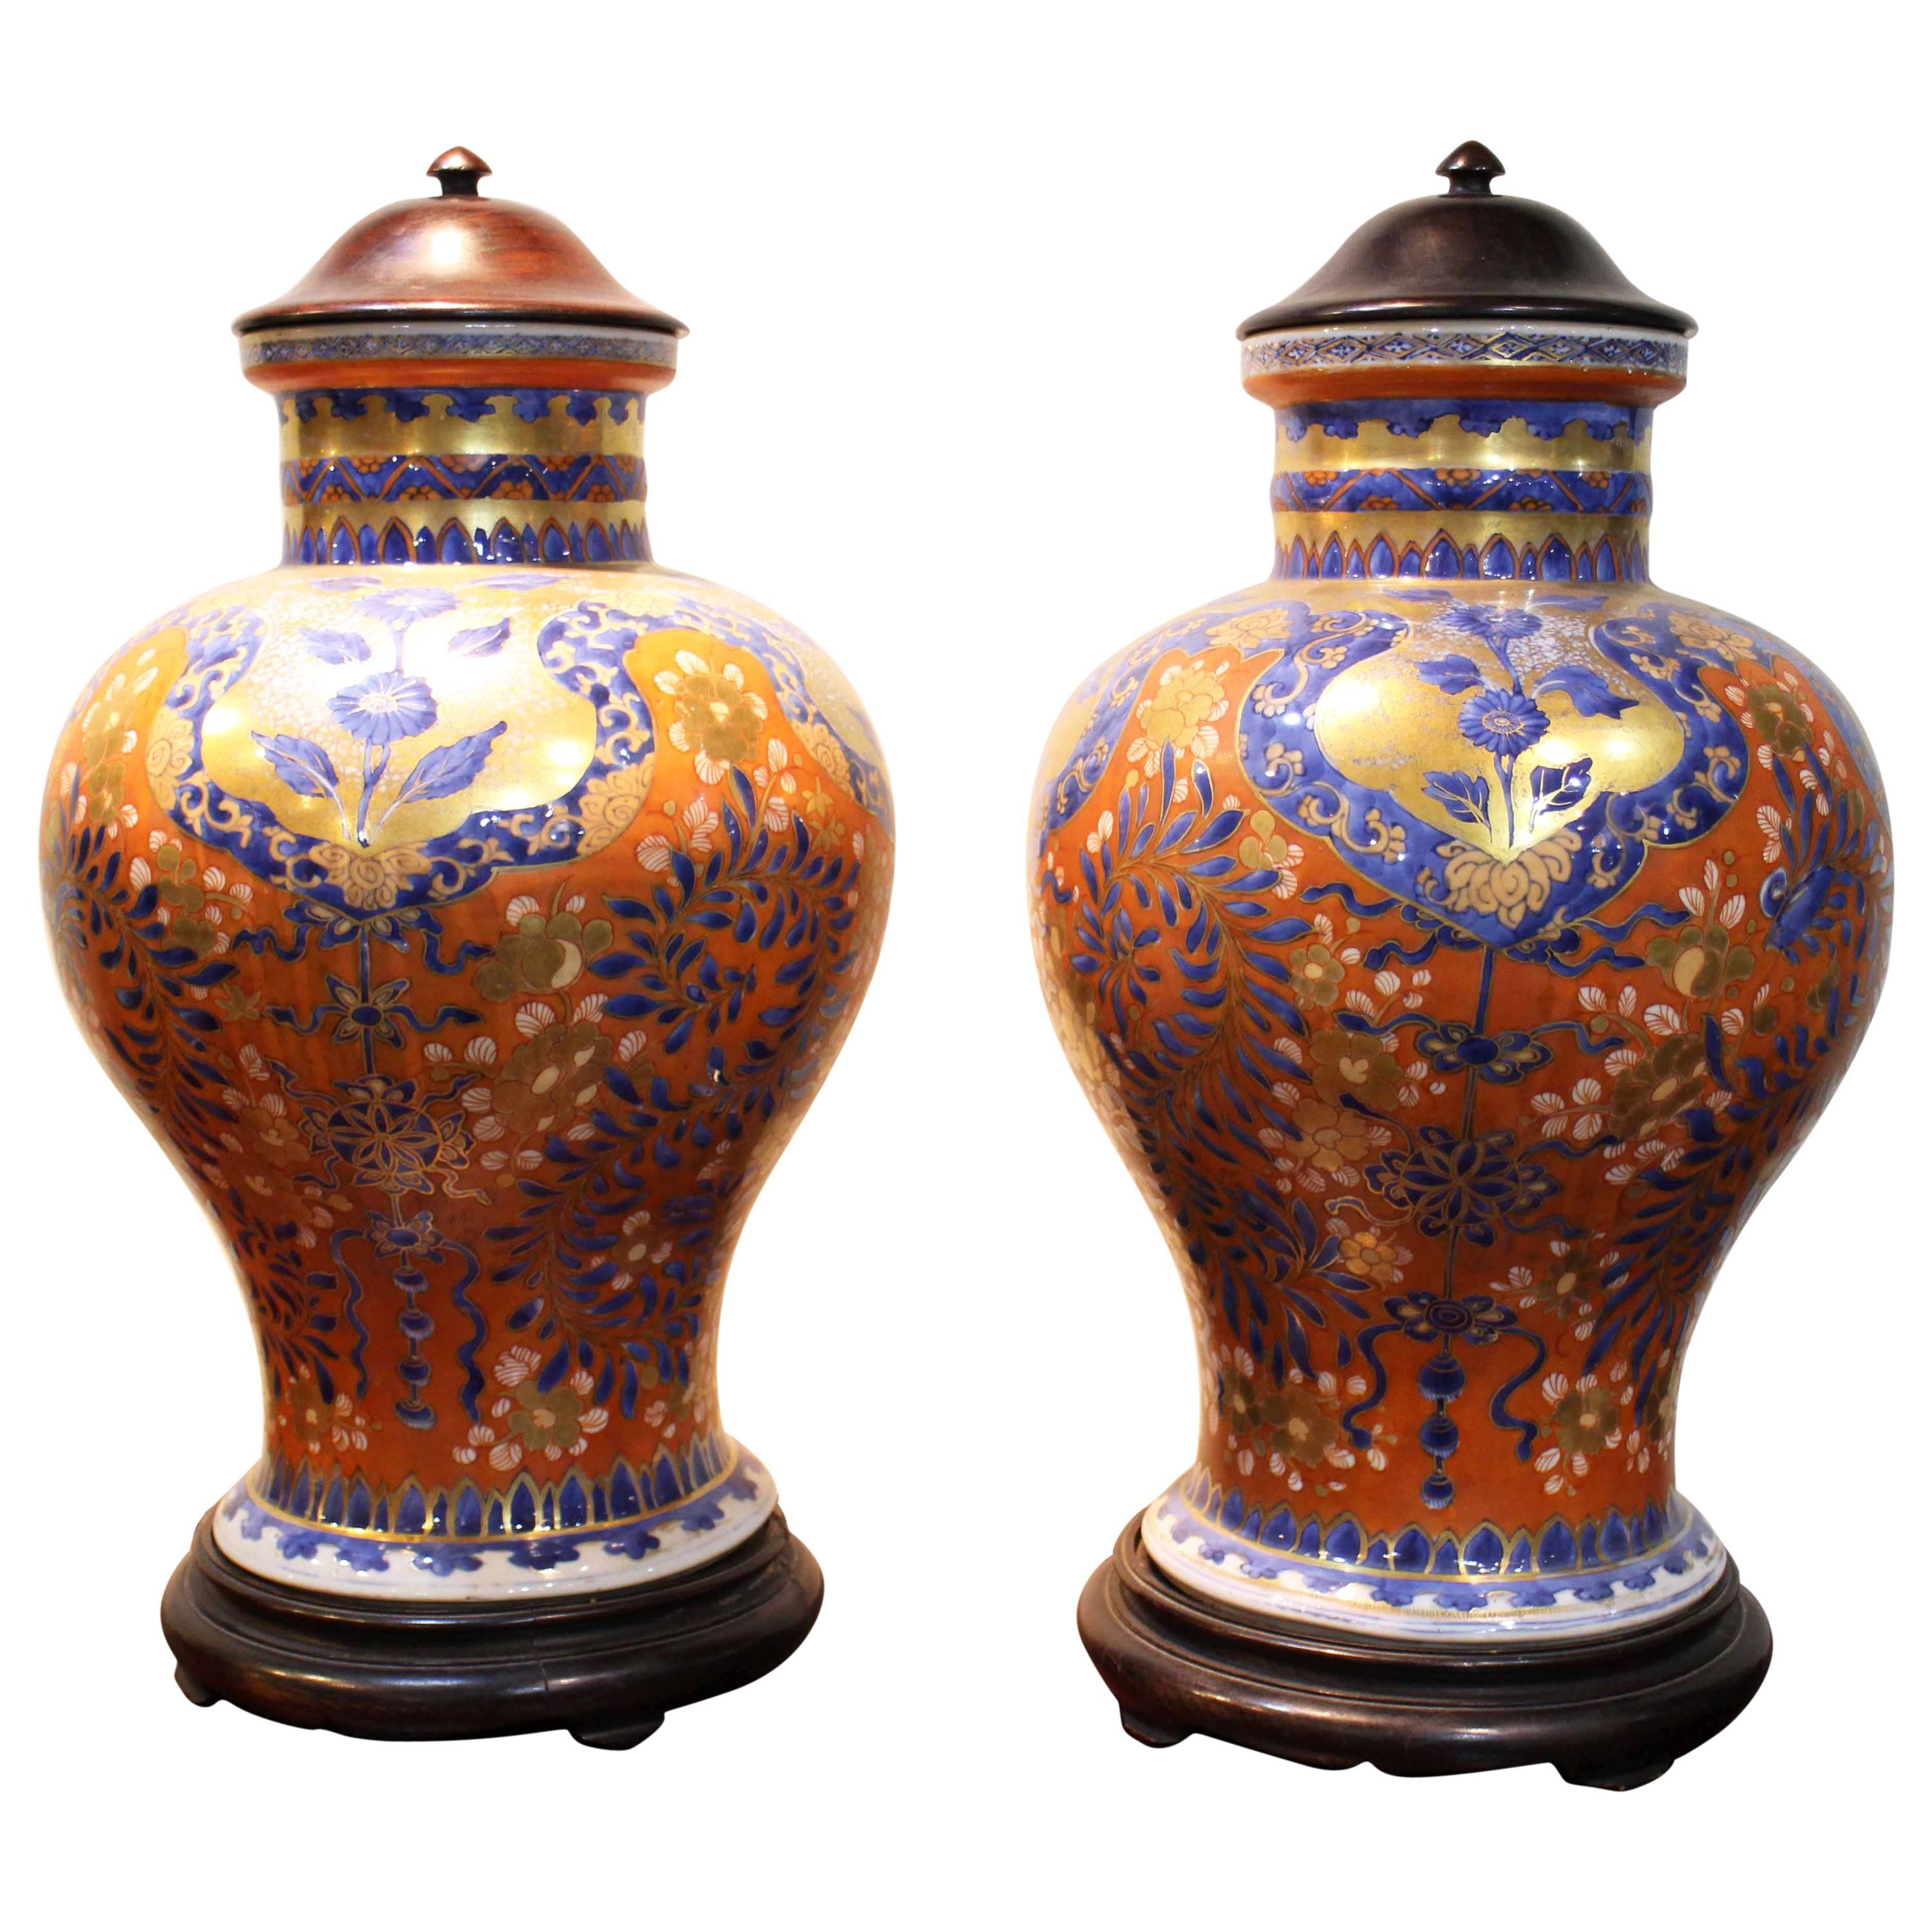 Pair of Antique Chinese 'Clobbered' Kang Hsi Period Vases, Covers and Bases For Sale